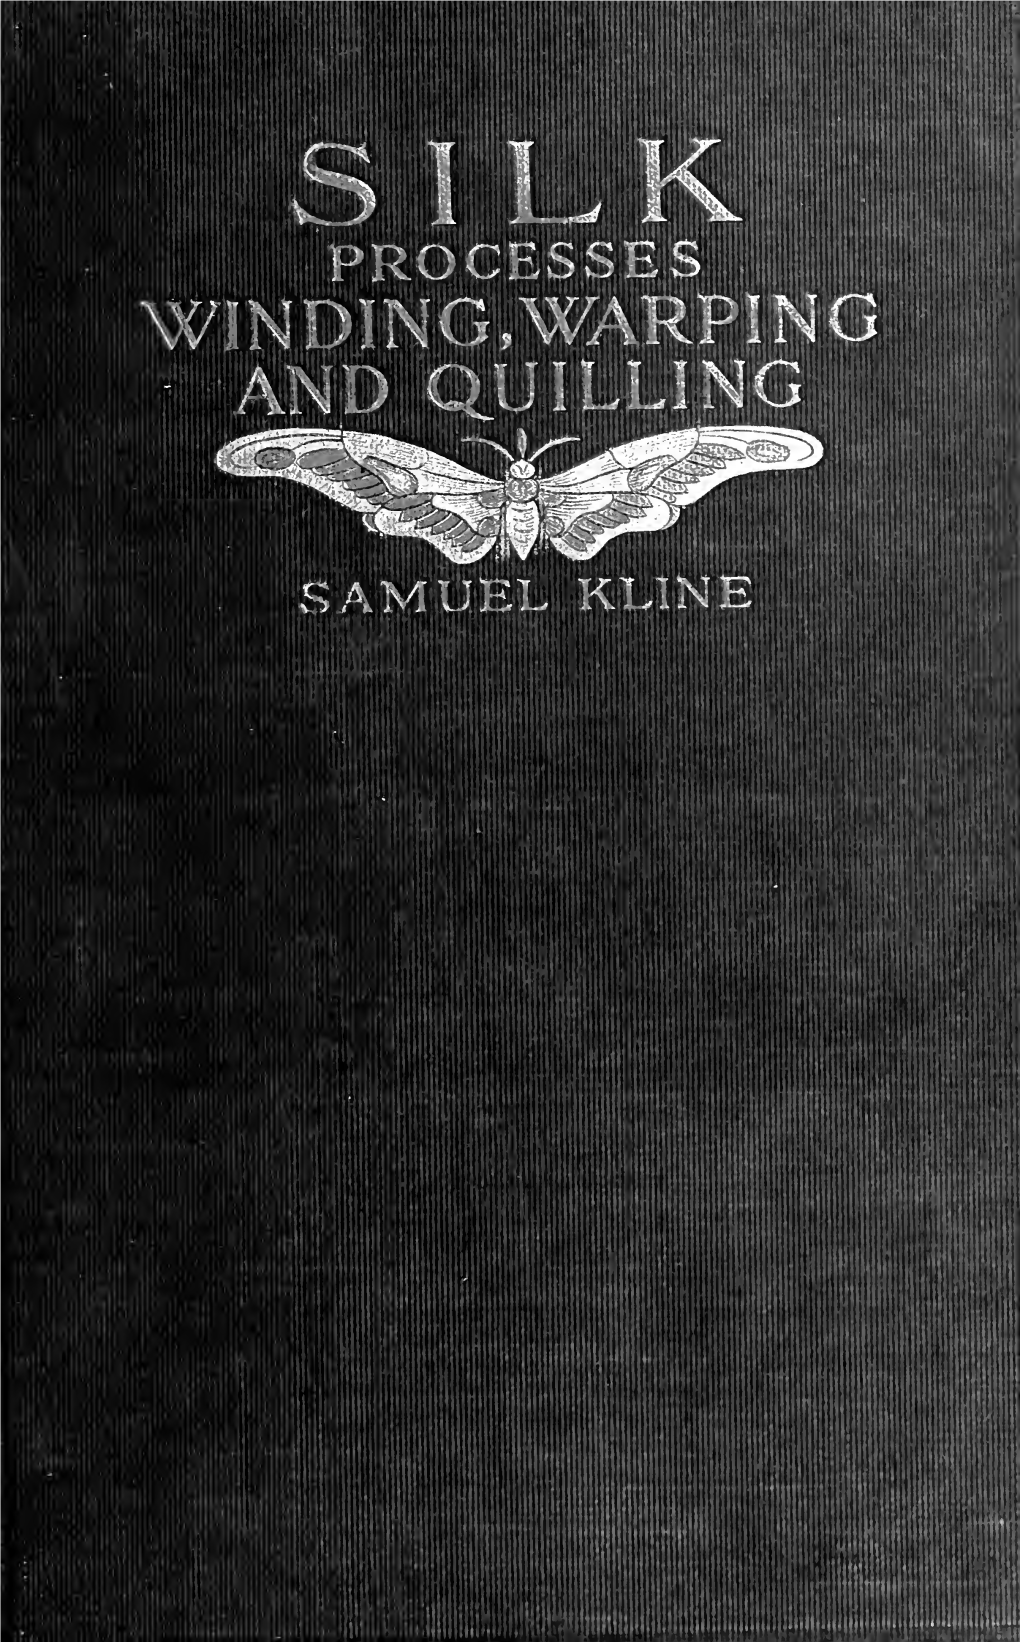 A Manual of the Processes of Winding, Warping and Quilling of Silk And